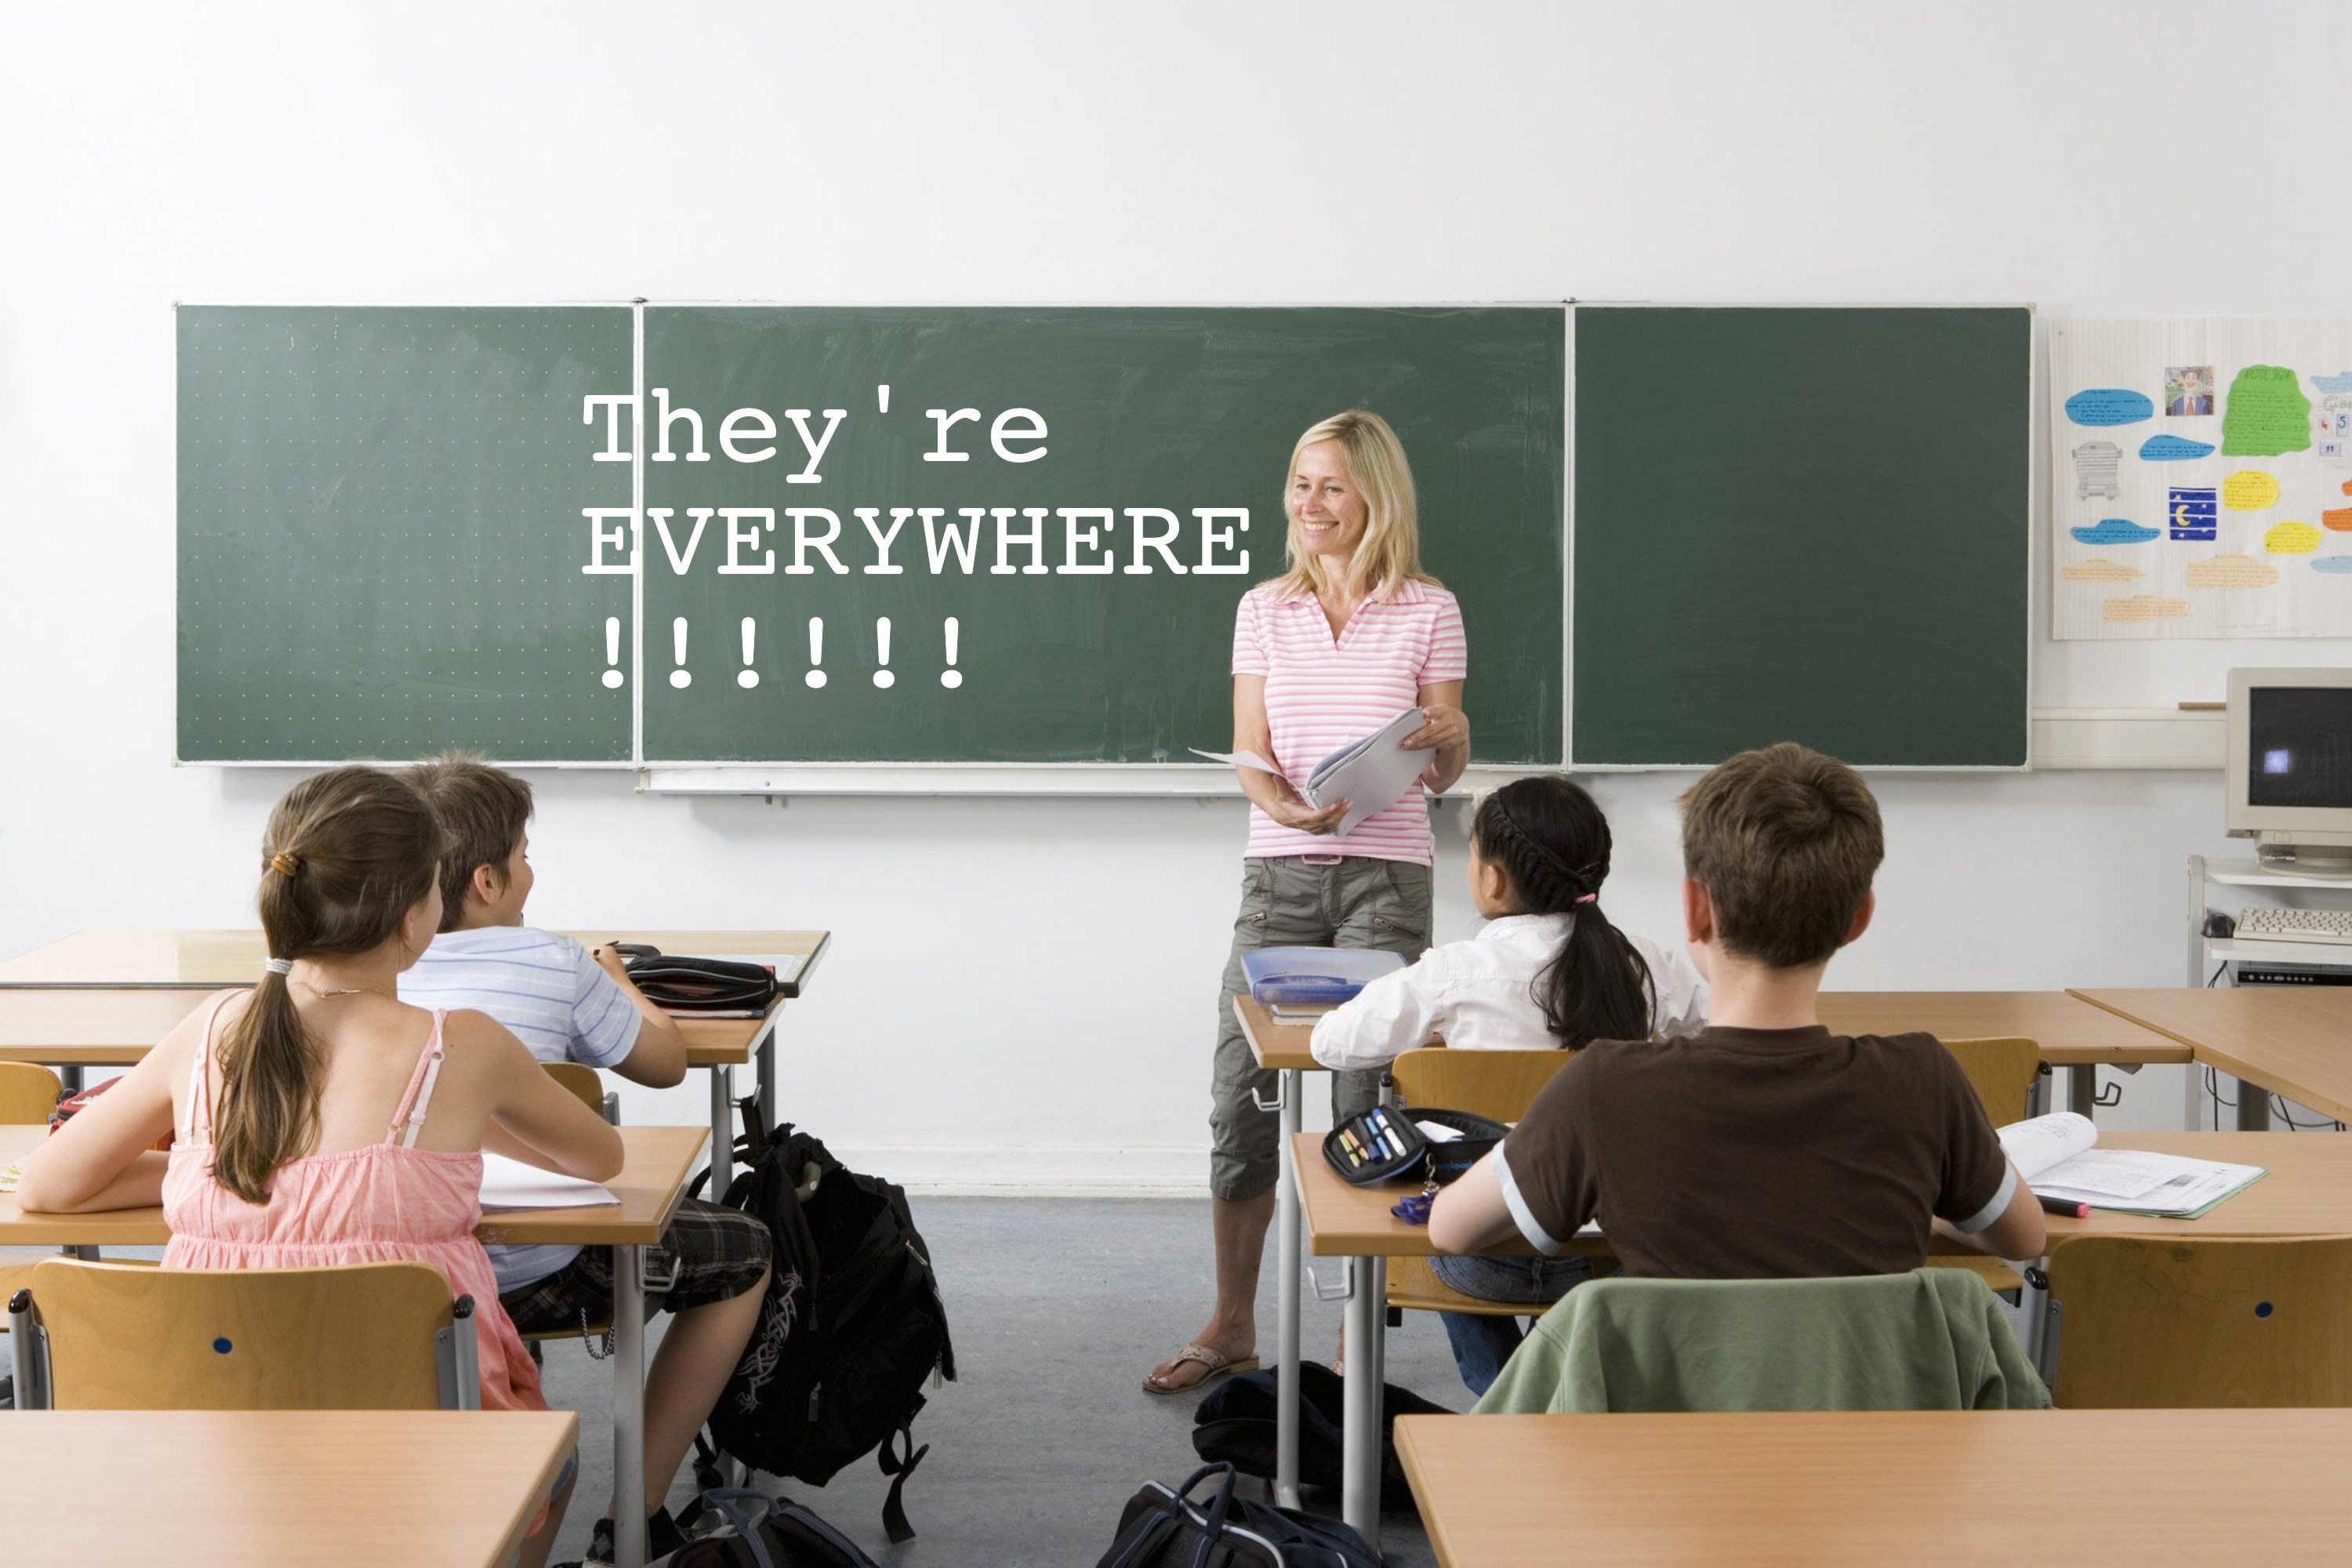 A teacher standing at the front of a class with &quot;They&#x27;re EVERYWHERE!!!!!!&quot; written on the chalkboard